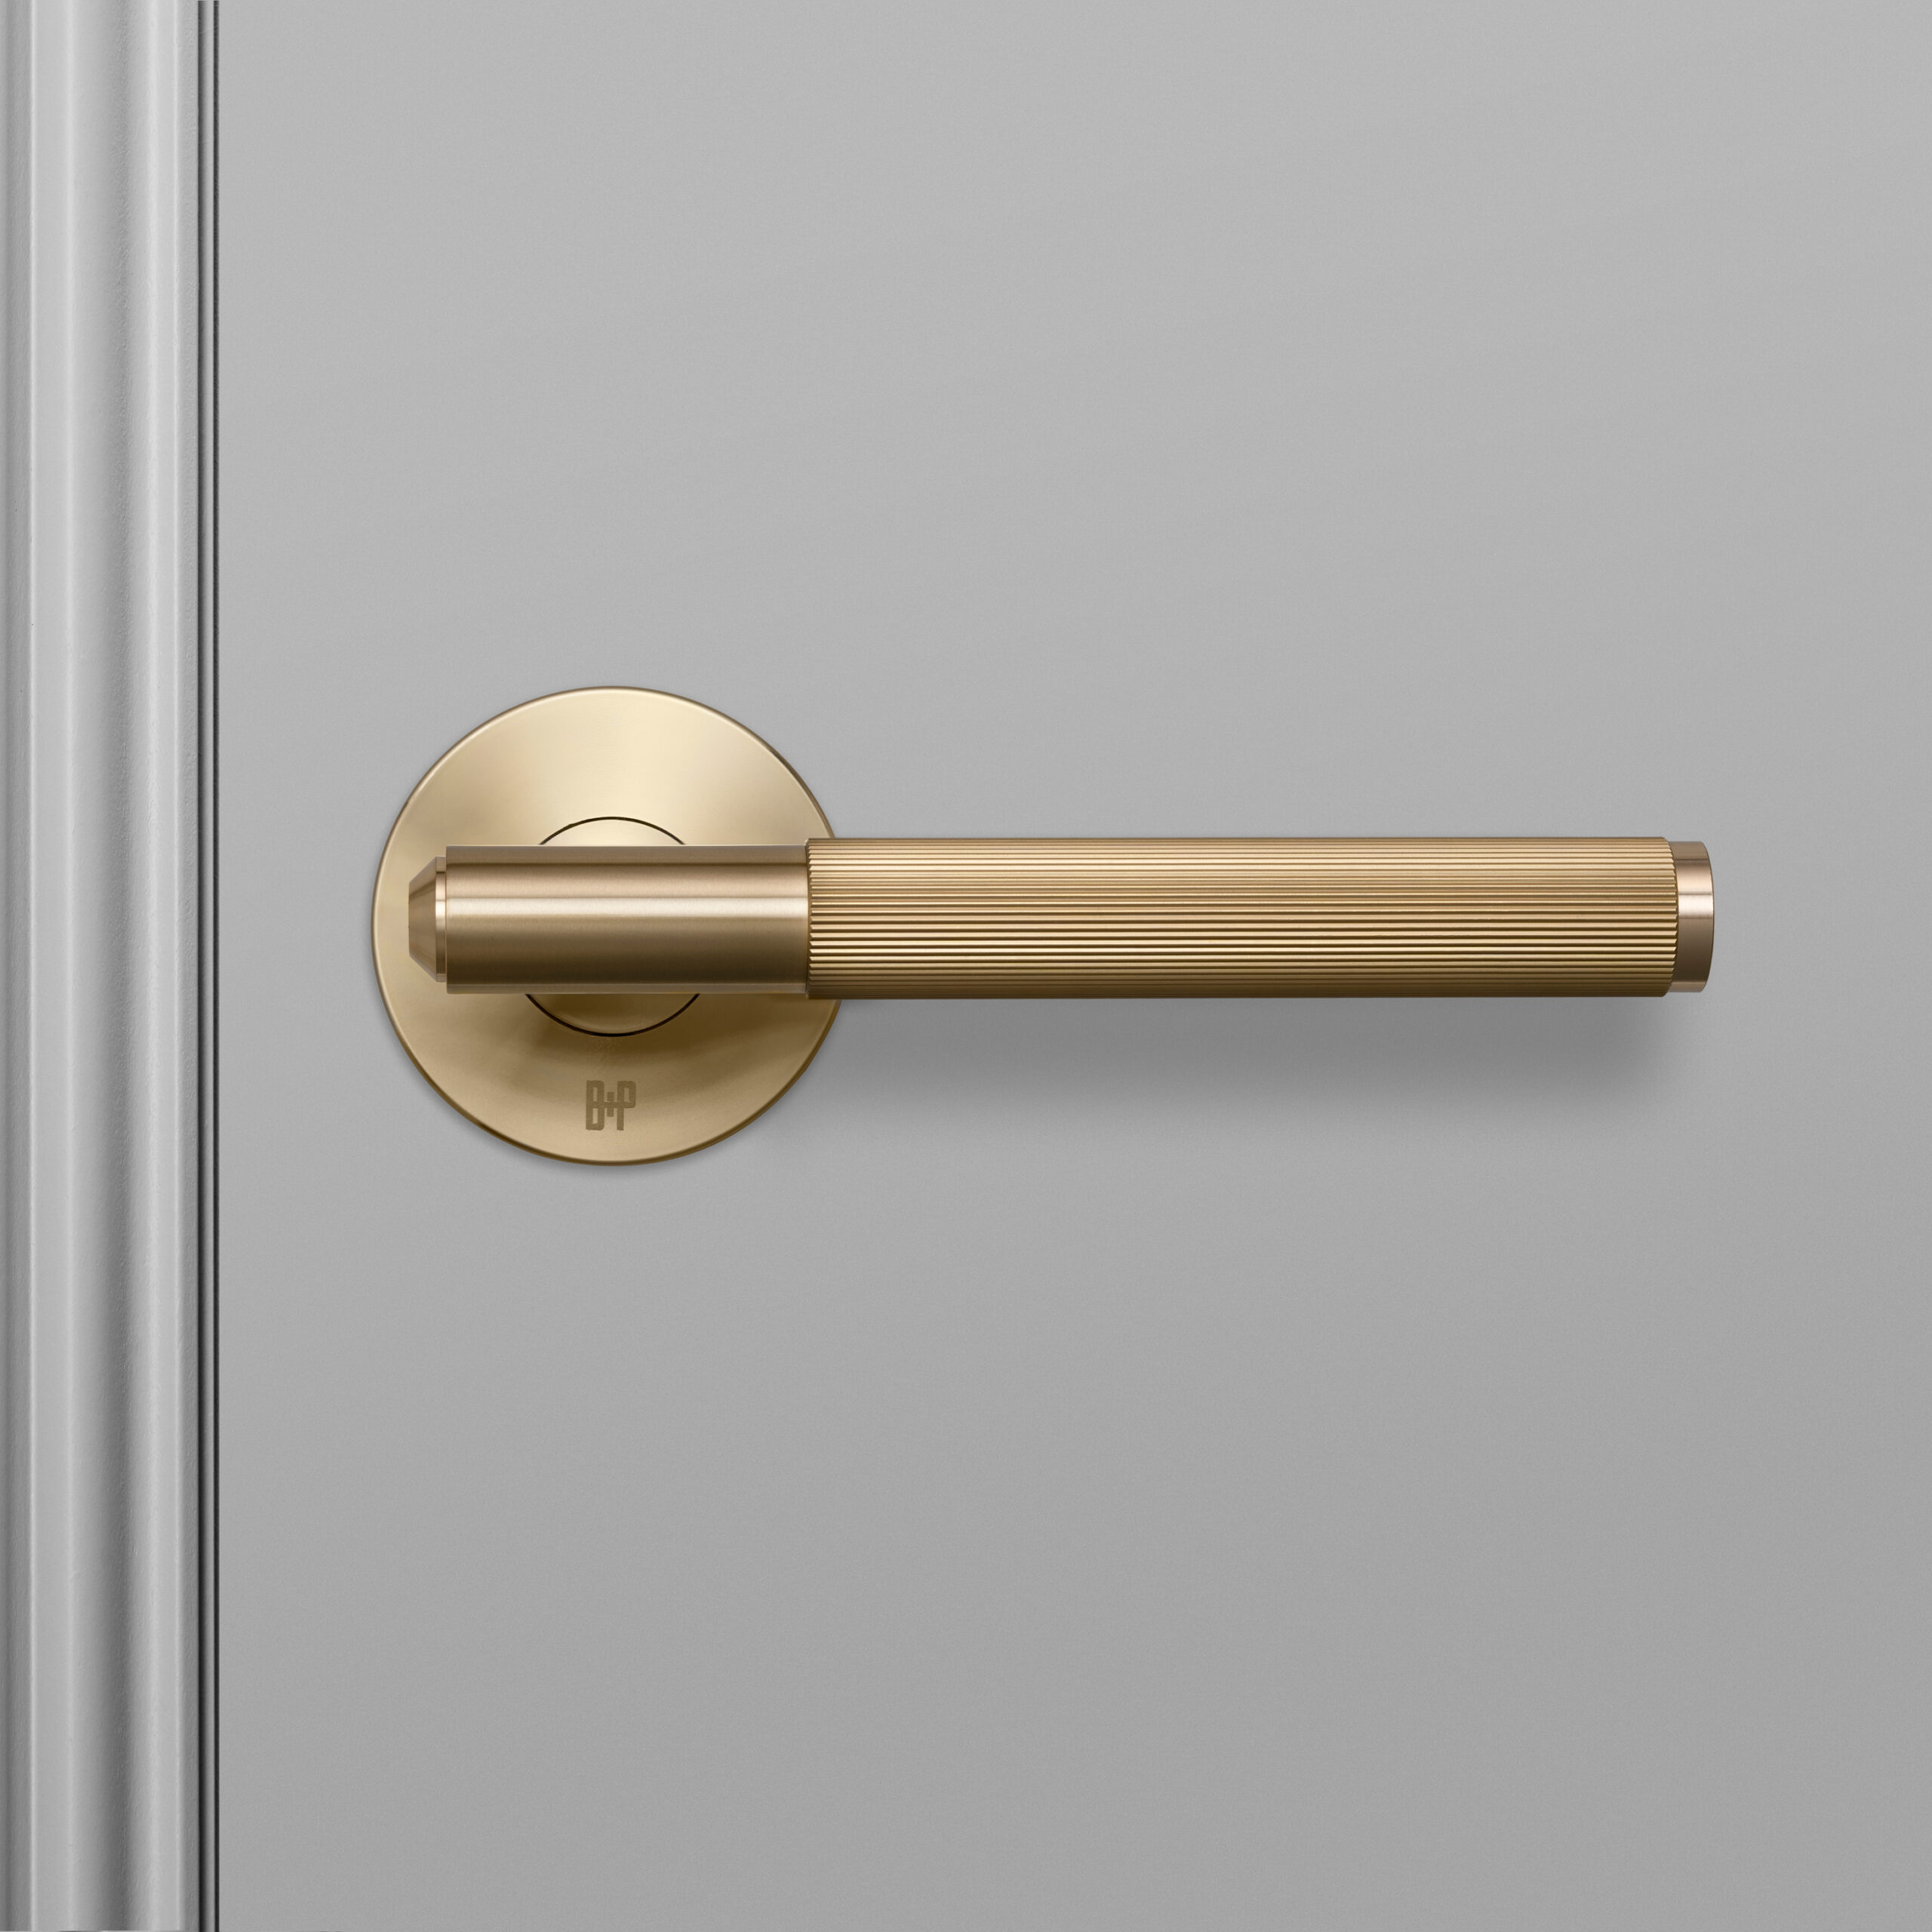 https://www.busterandpunch.com/us/wp-content/uploads/sites/2/2021/04/Door-handle_Fixed_Linear_Brass_A2_Web_Square-scaled.jpg